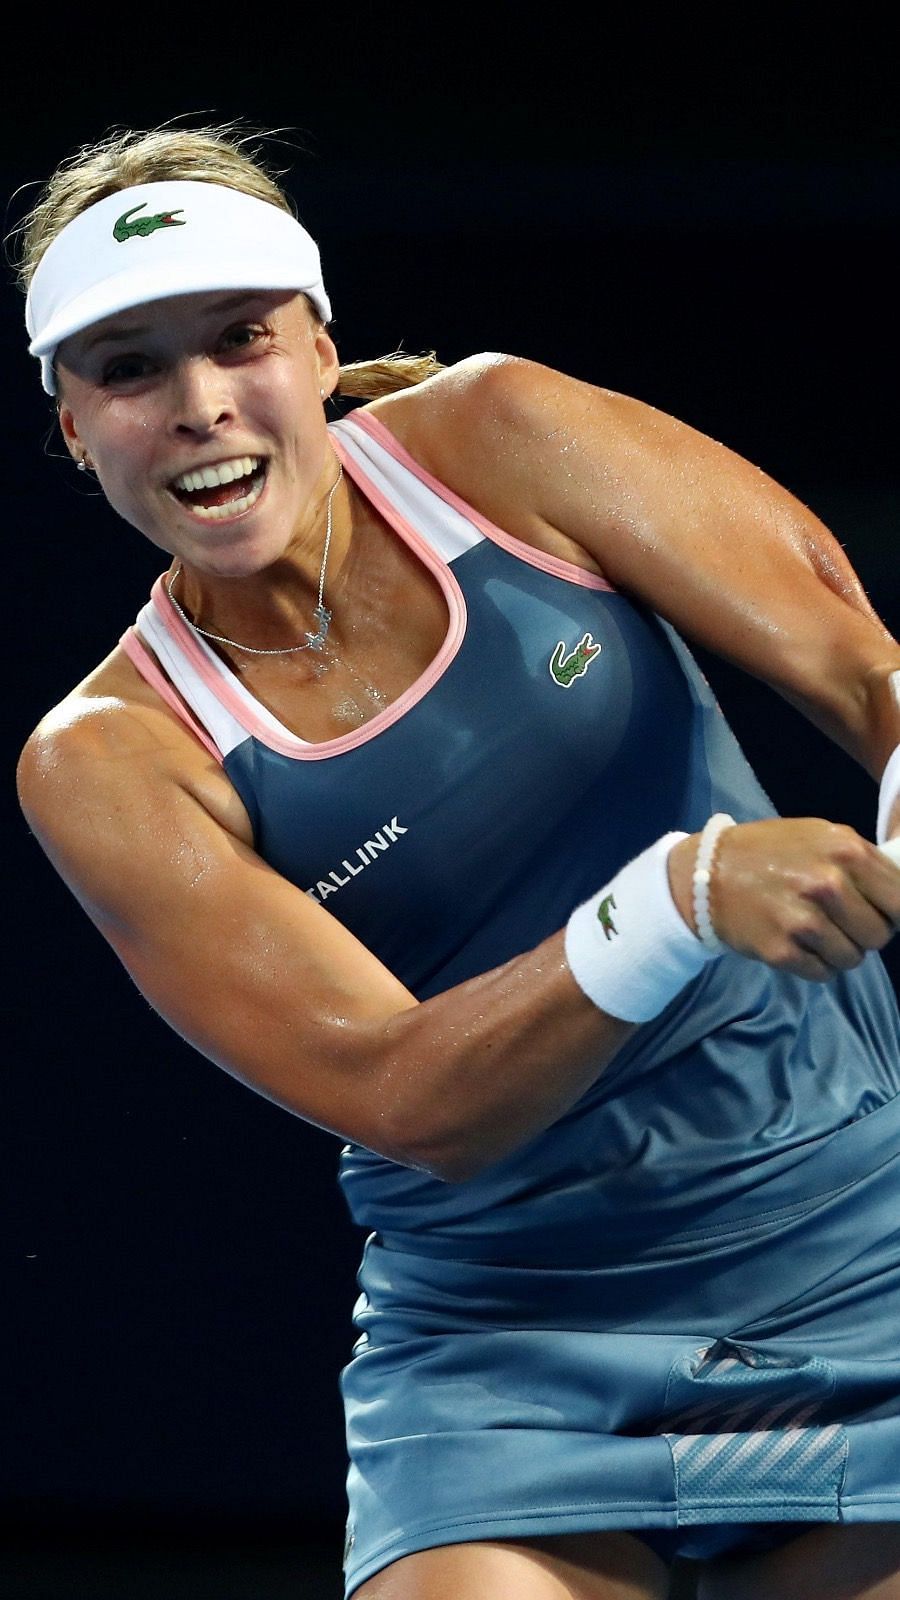 US Open 2020 Anett Kontaveit vs Magda Linette preview, head-to-head and prediction